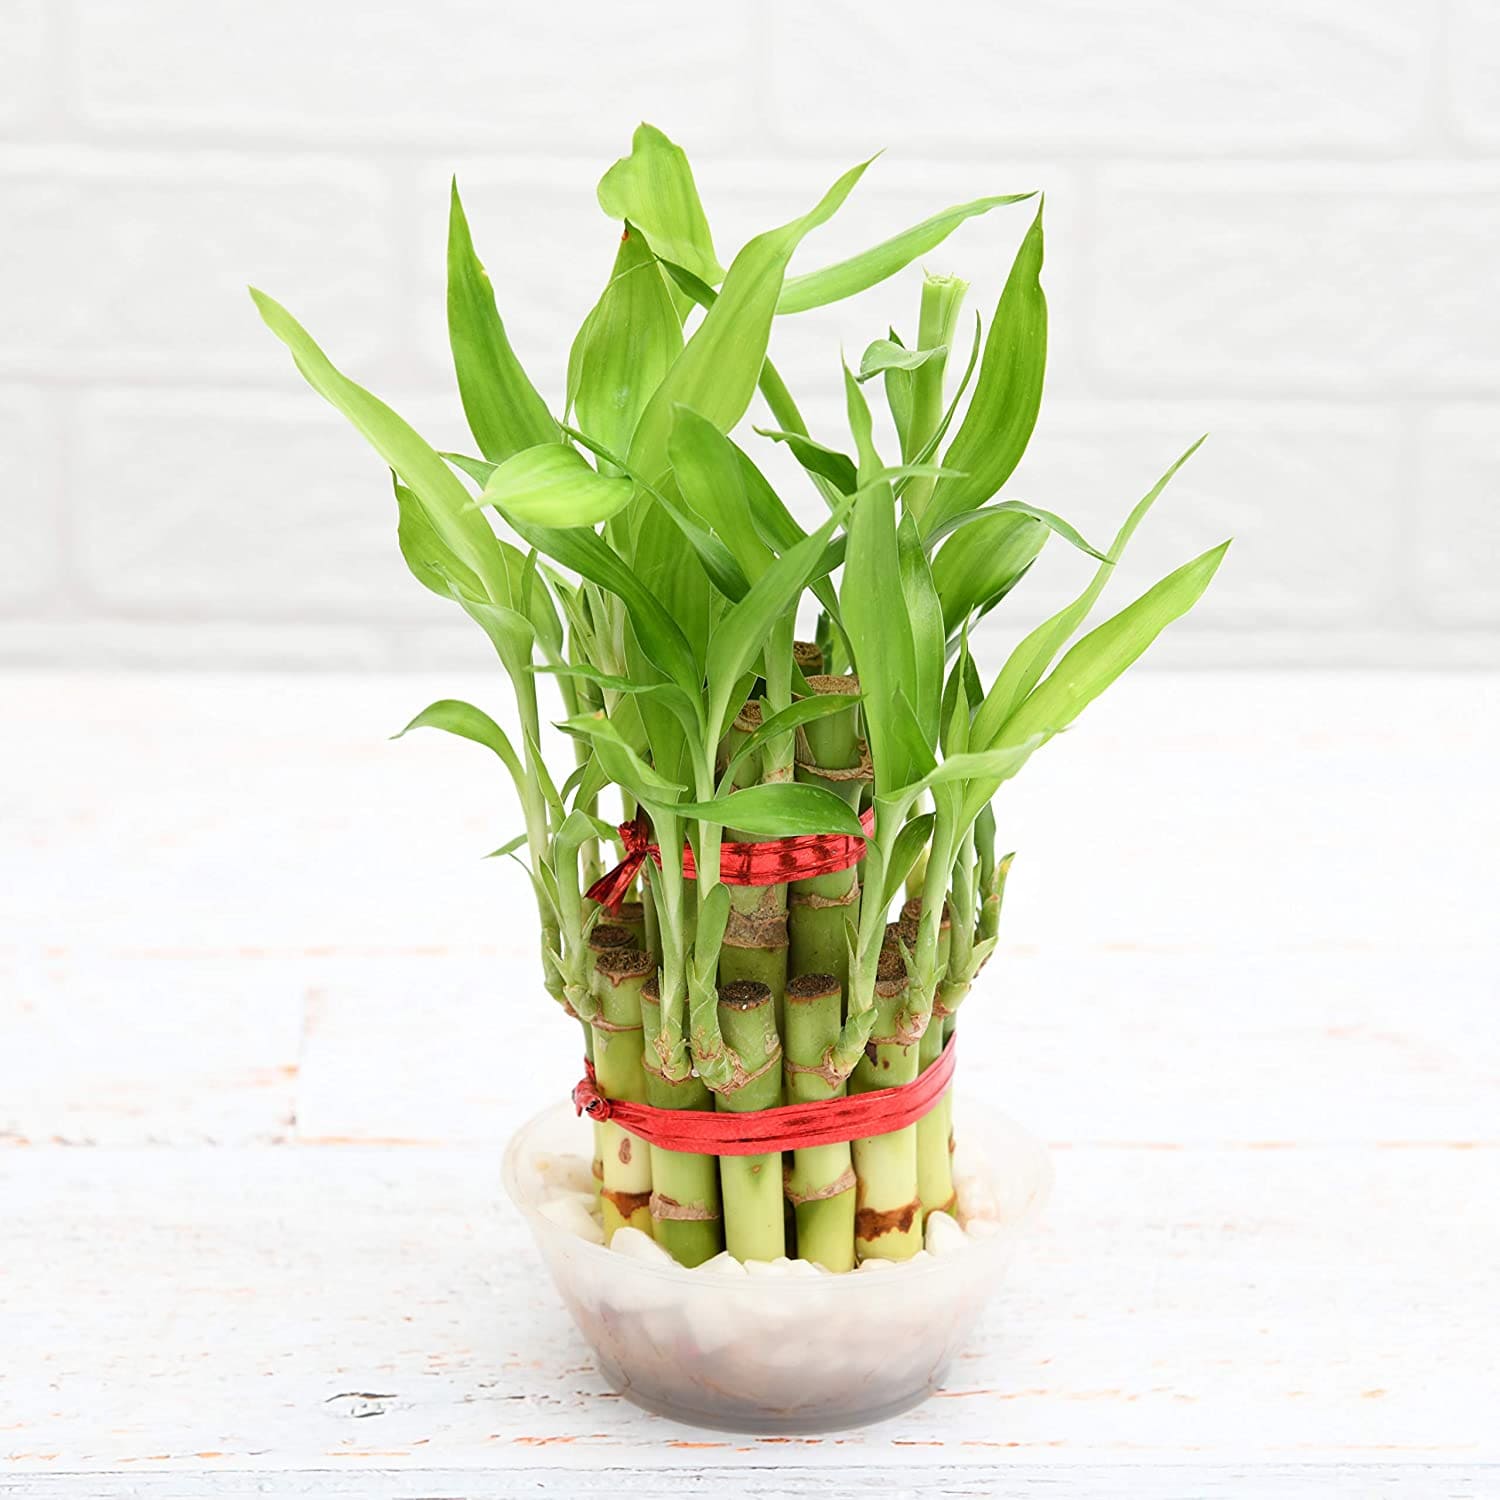 14 beautiful lucky bamboo varieties to take home - 103